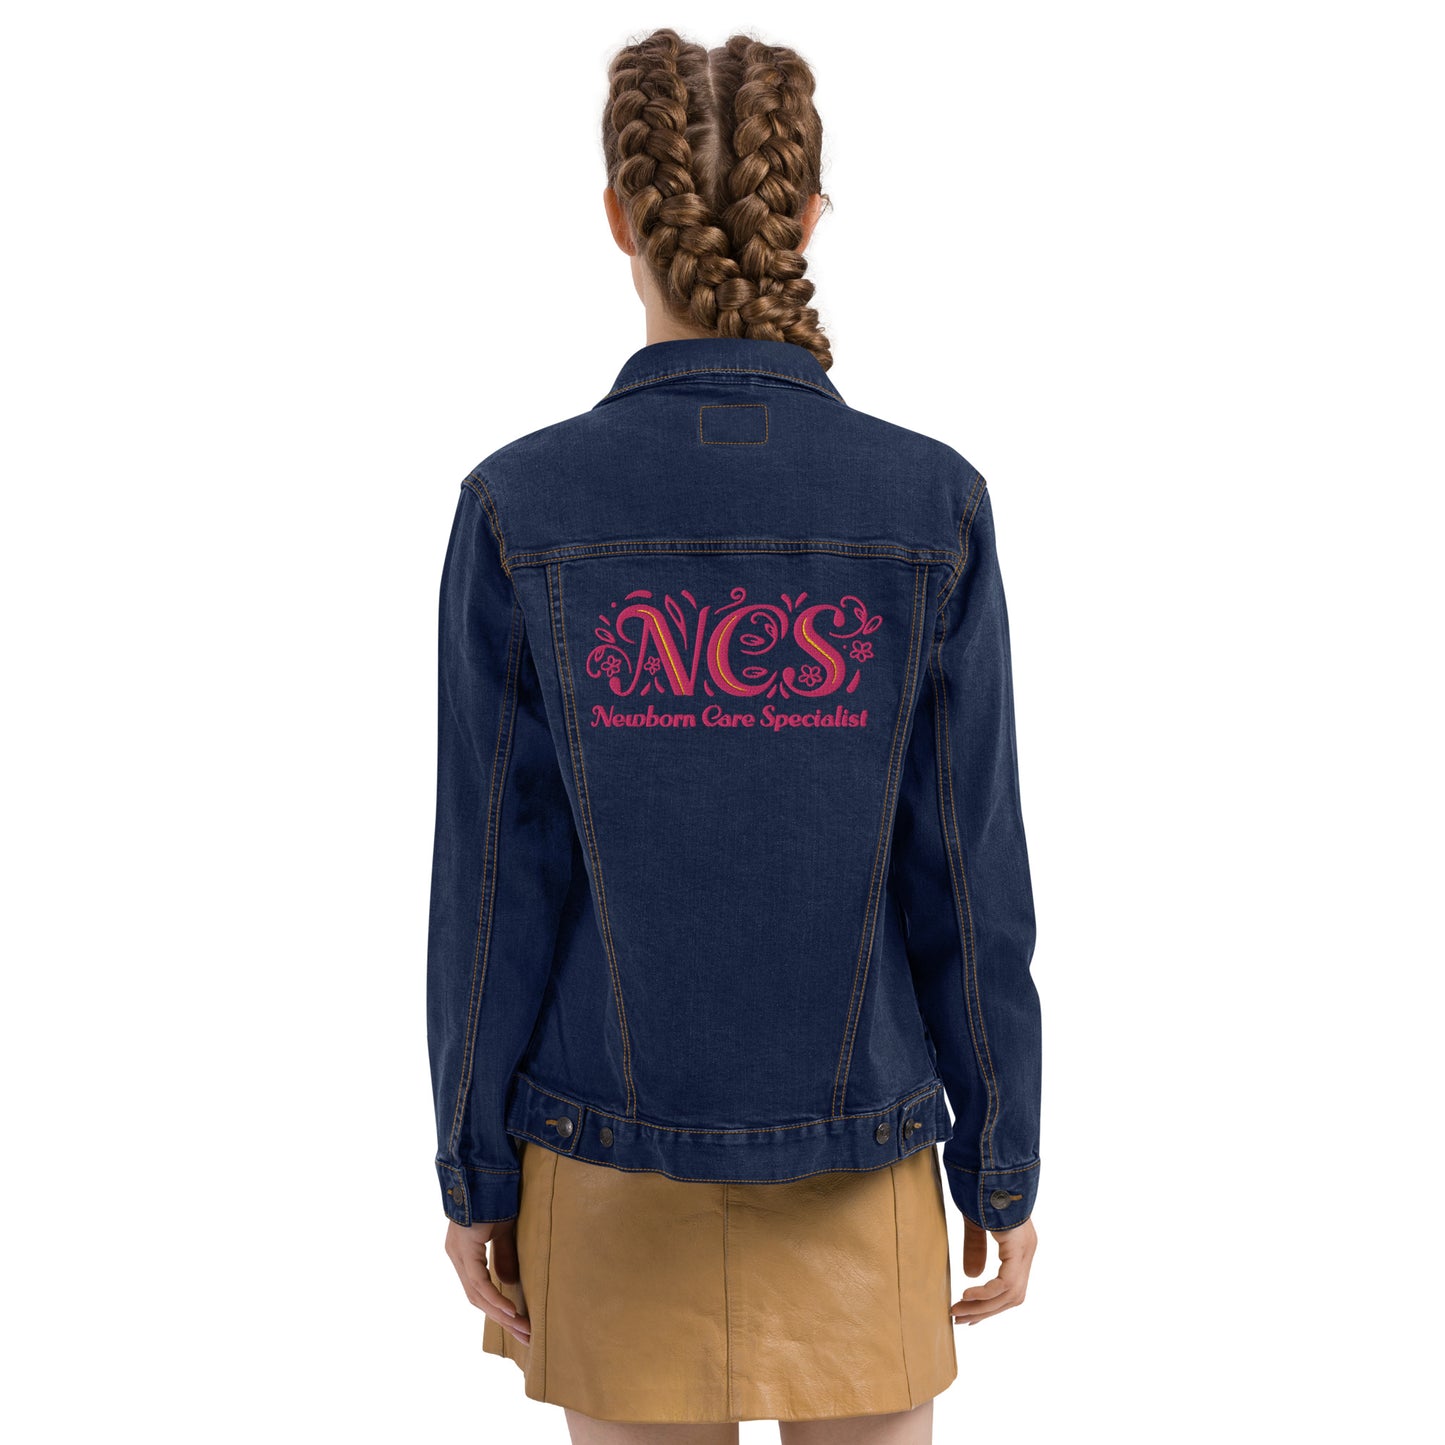 NCS embroidered denim jacket by The Nanny Store